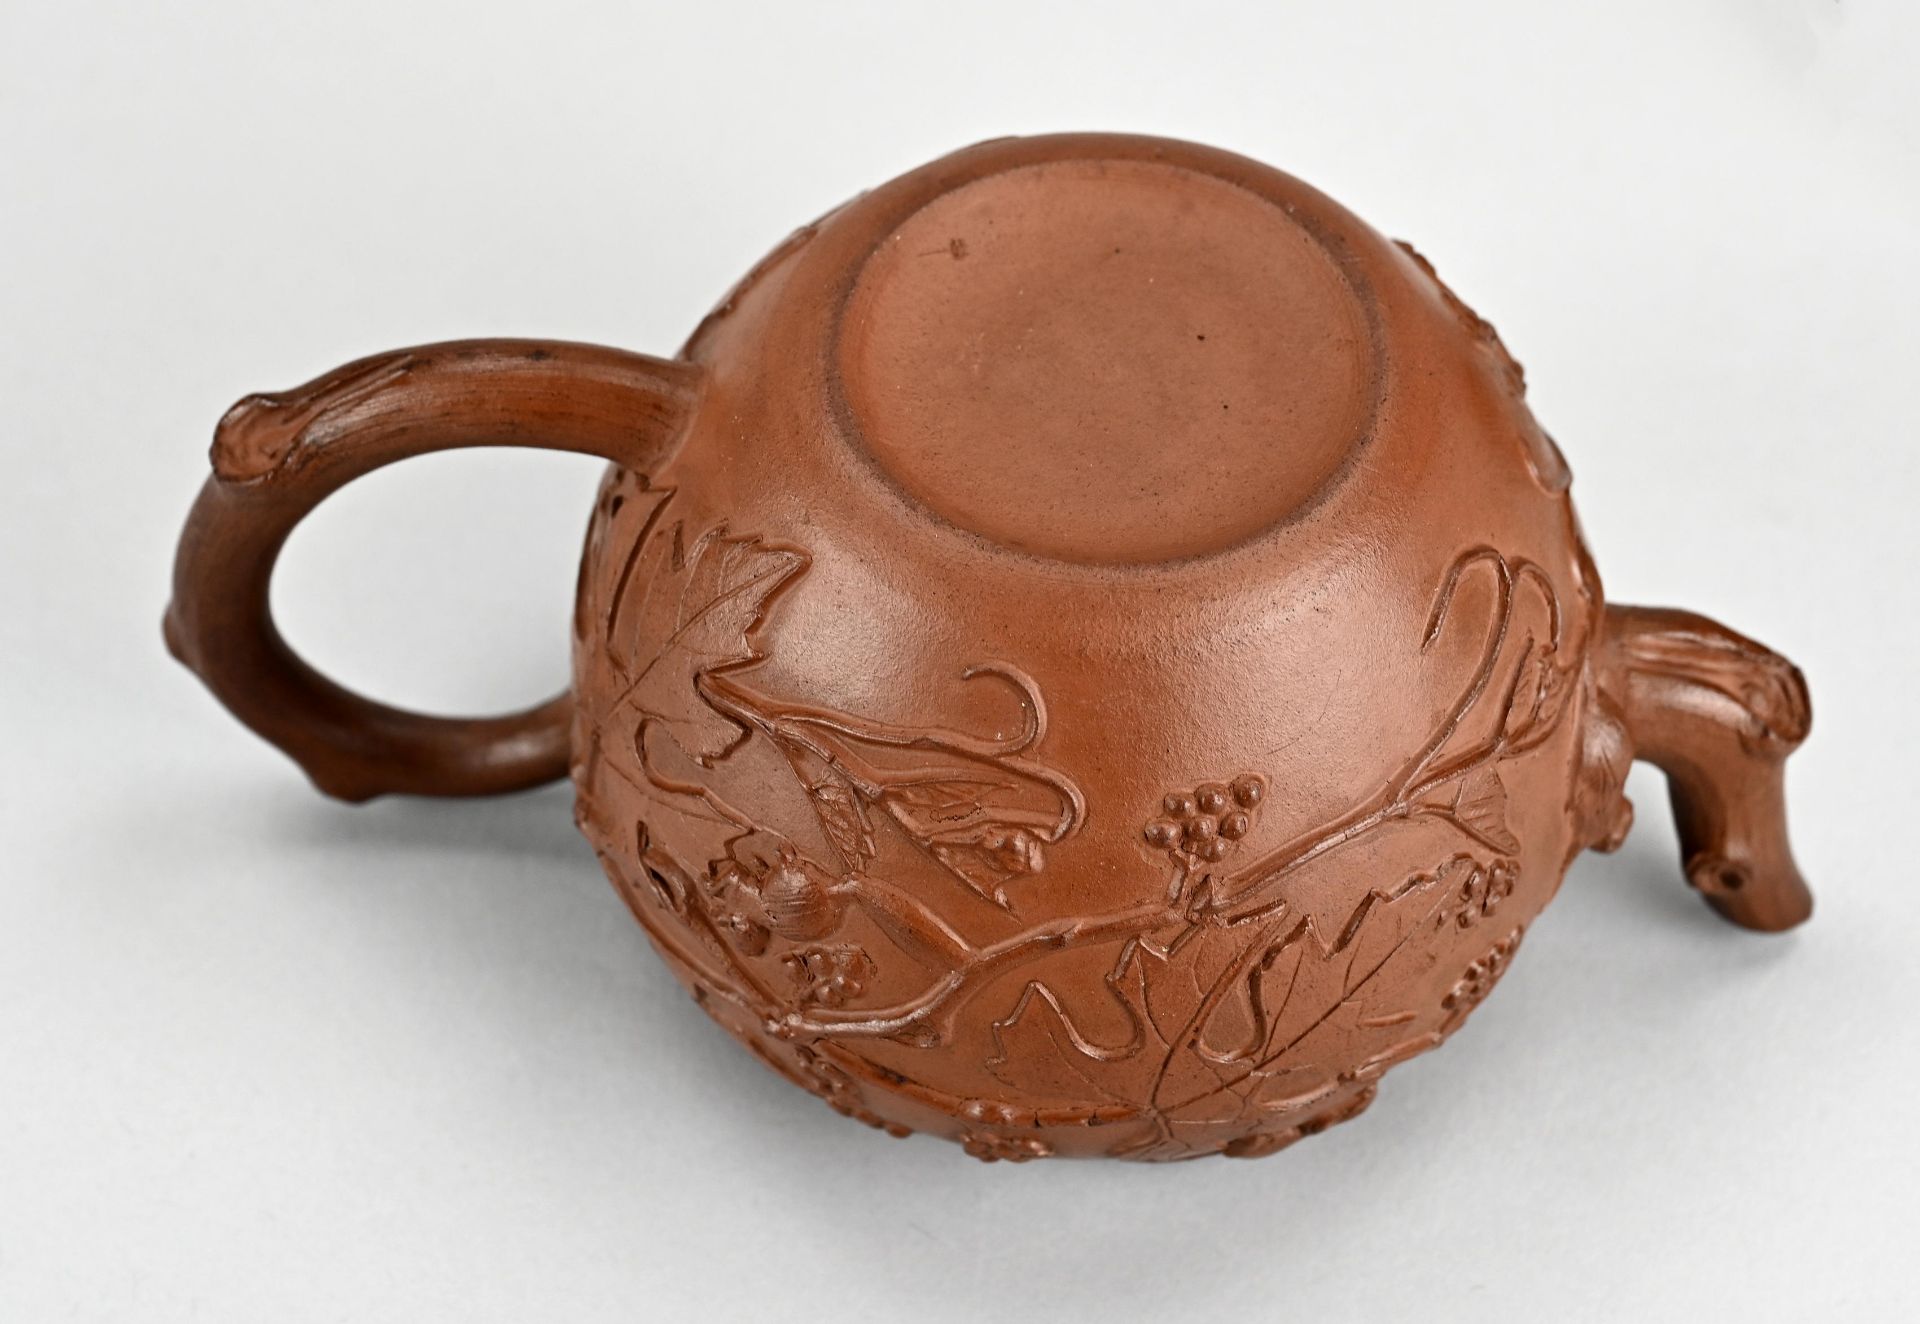 Chinese teapot Ø 9.5 cm. - Image 3 of 3